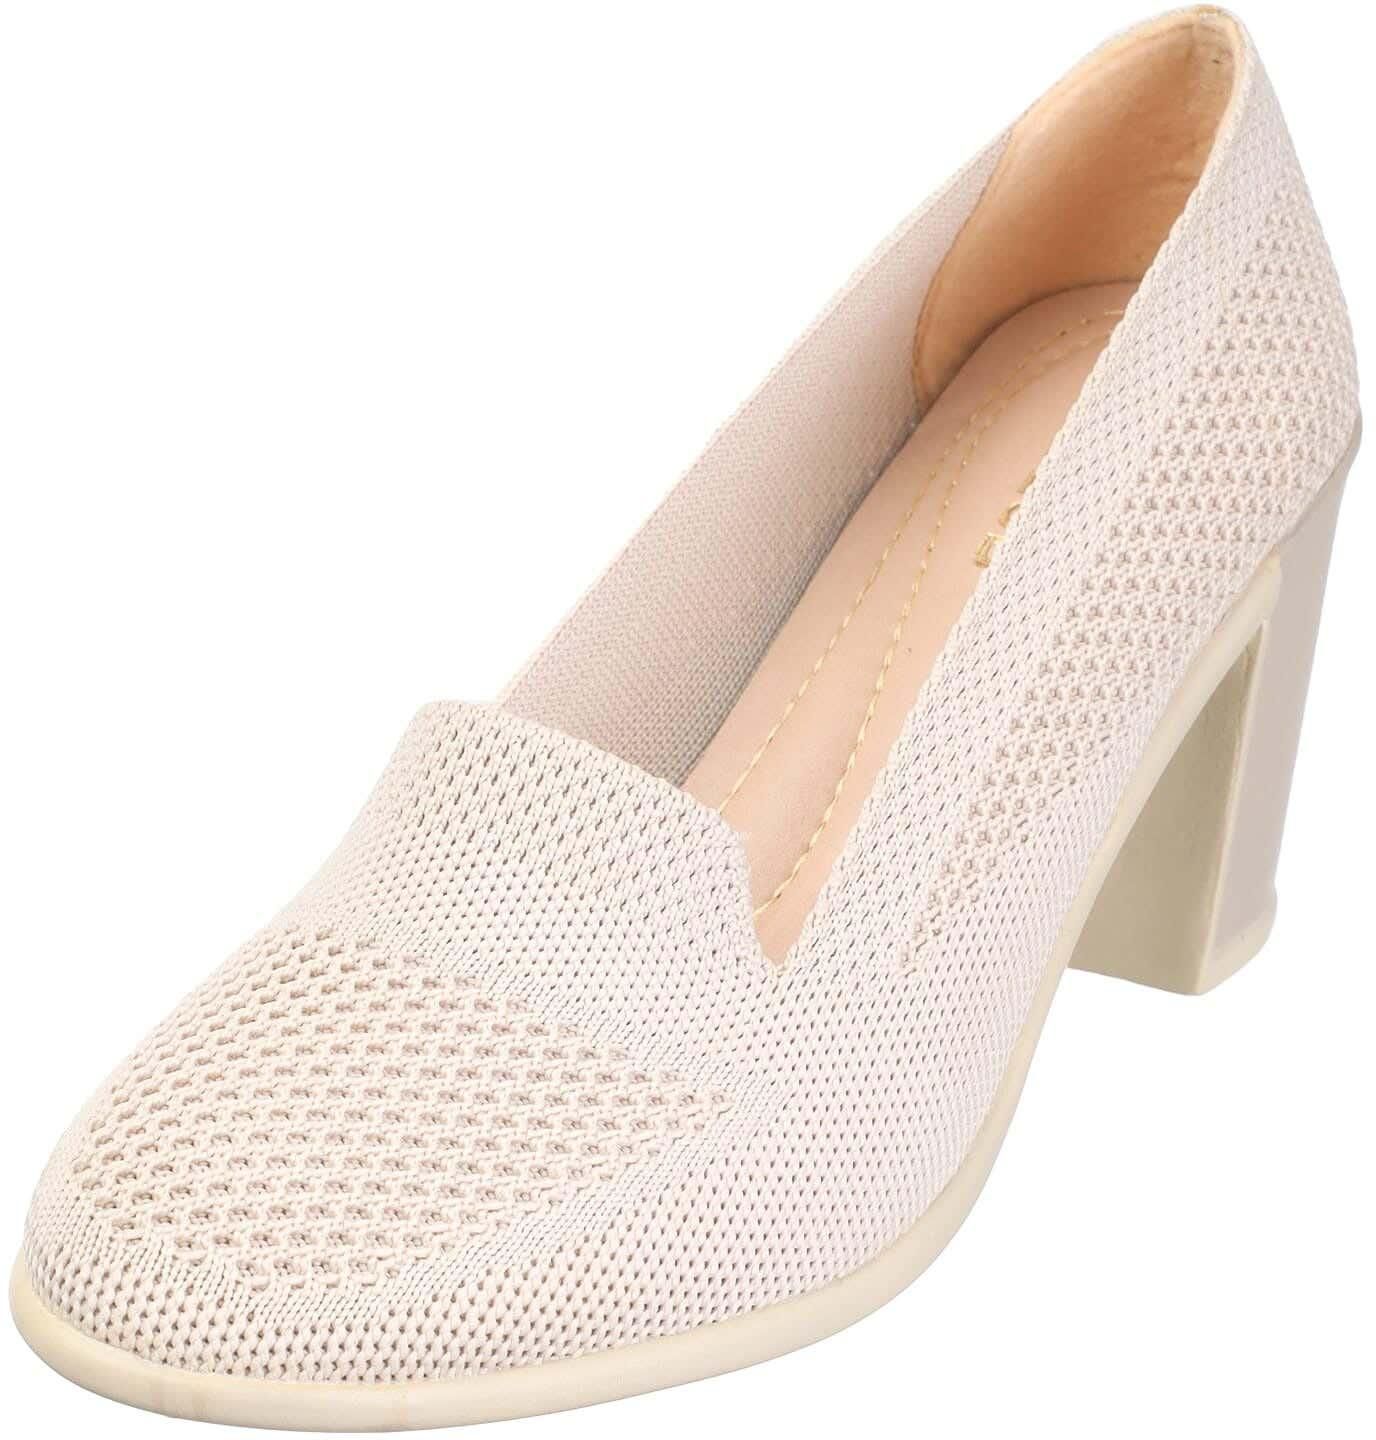 Get Fabric Wedges Shoe For Women with best offers | Raneen.com